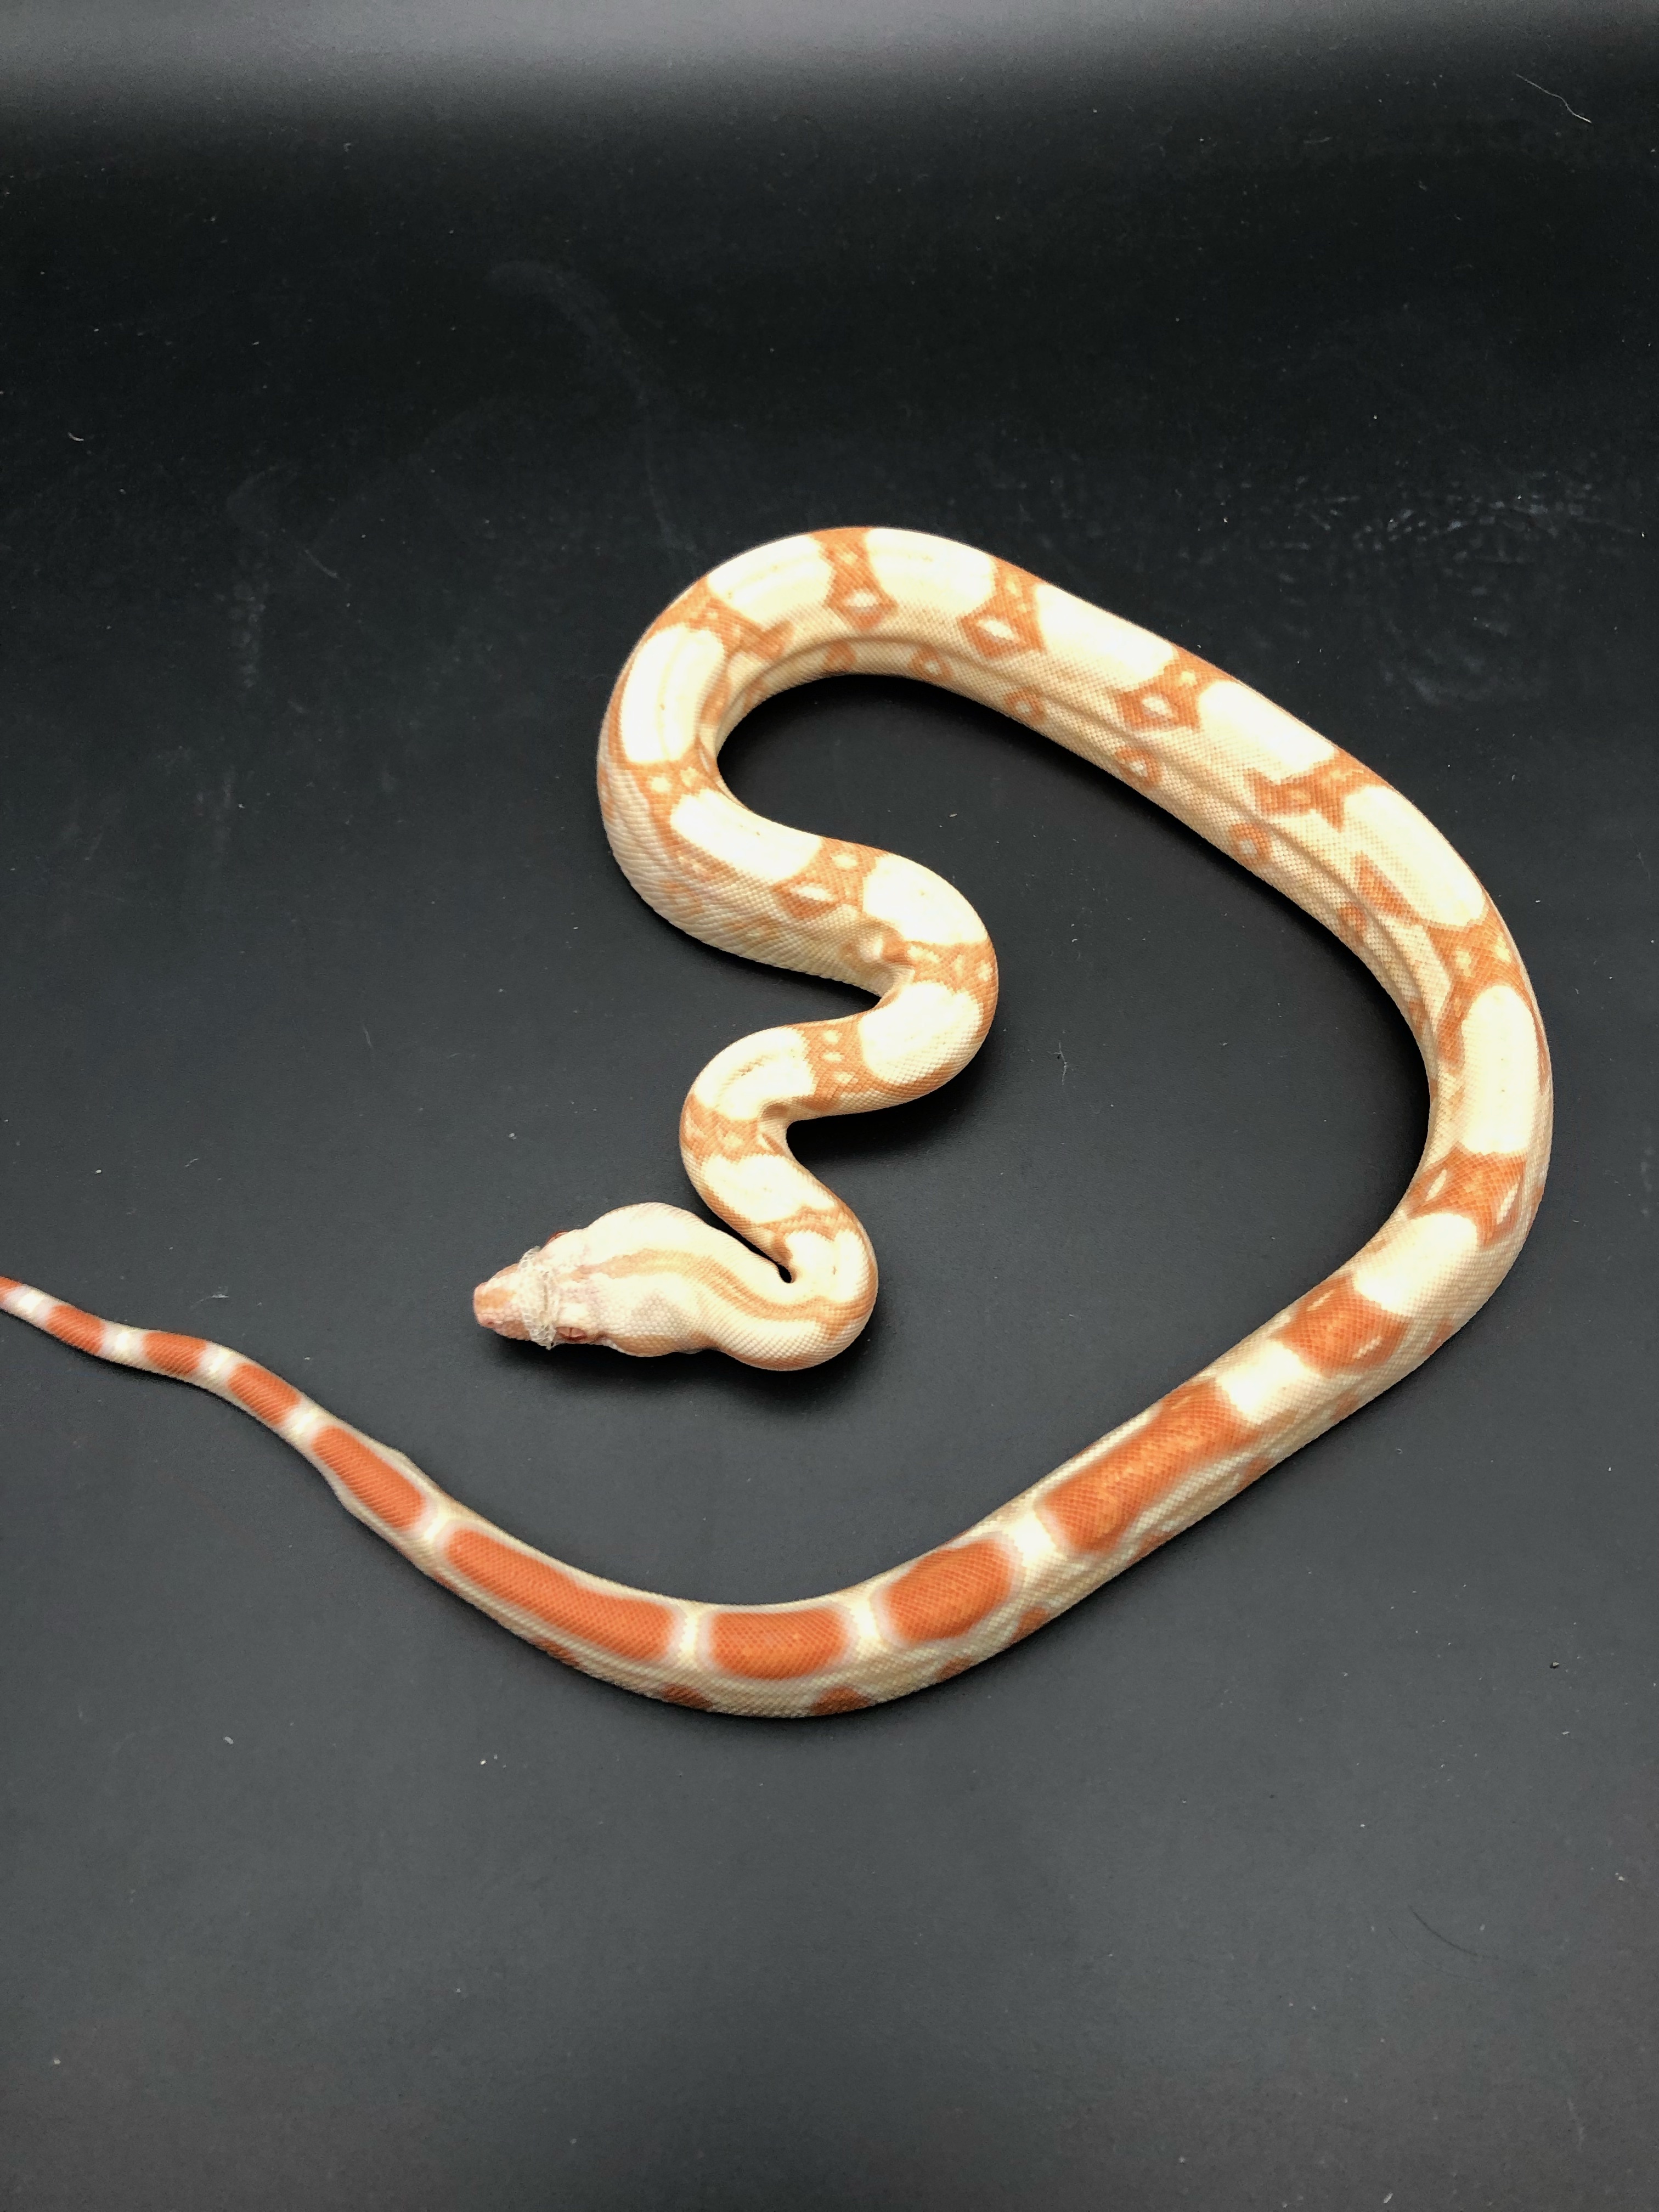 Albino (Kahl) Boa Constrictor by Karina’s Kritters